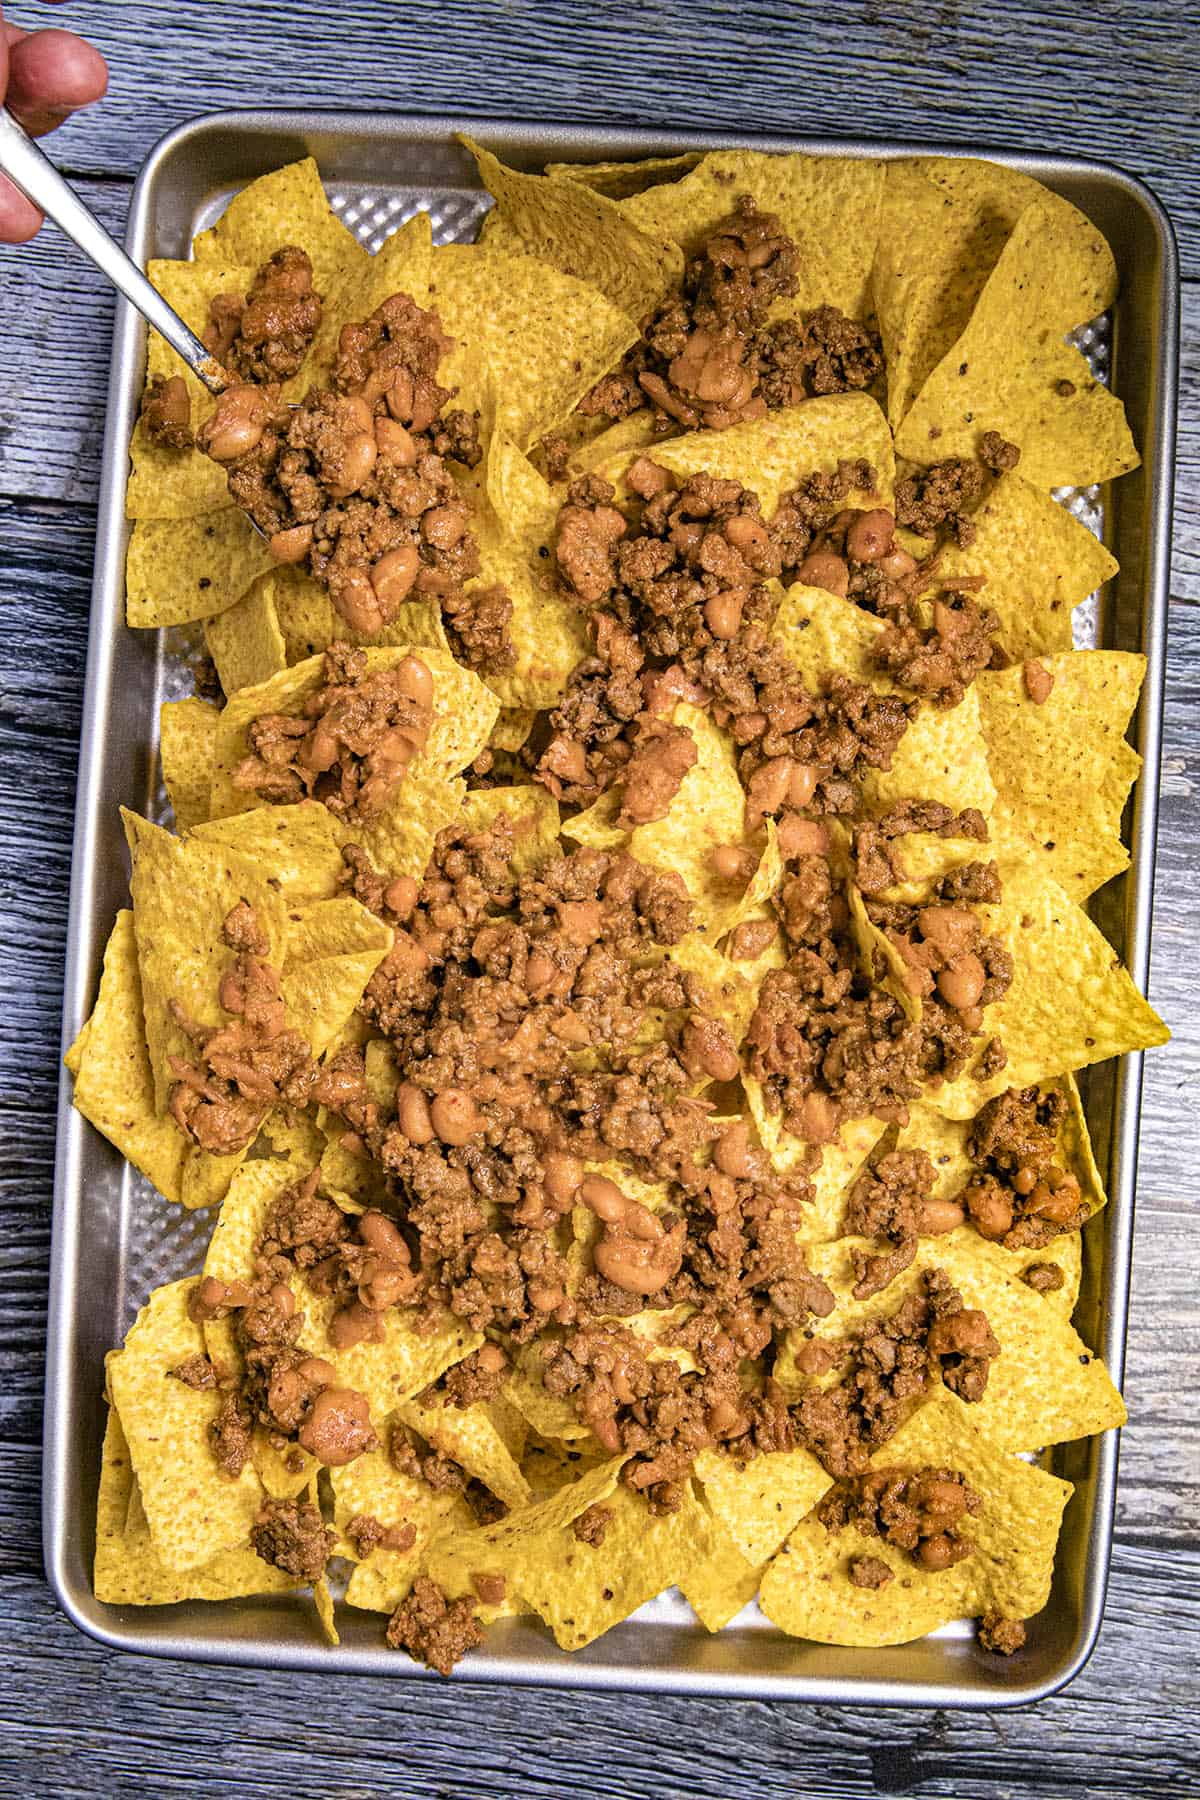 Layering the nacho chips with the taco meat and bean mixture